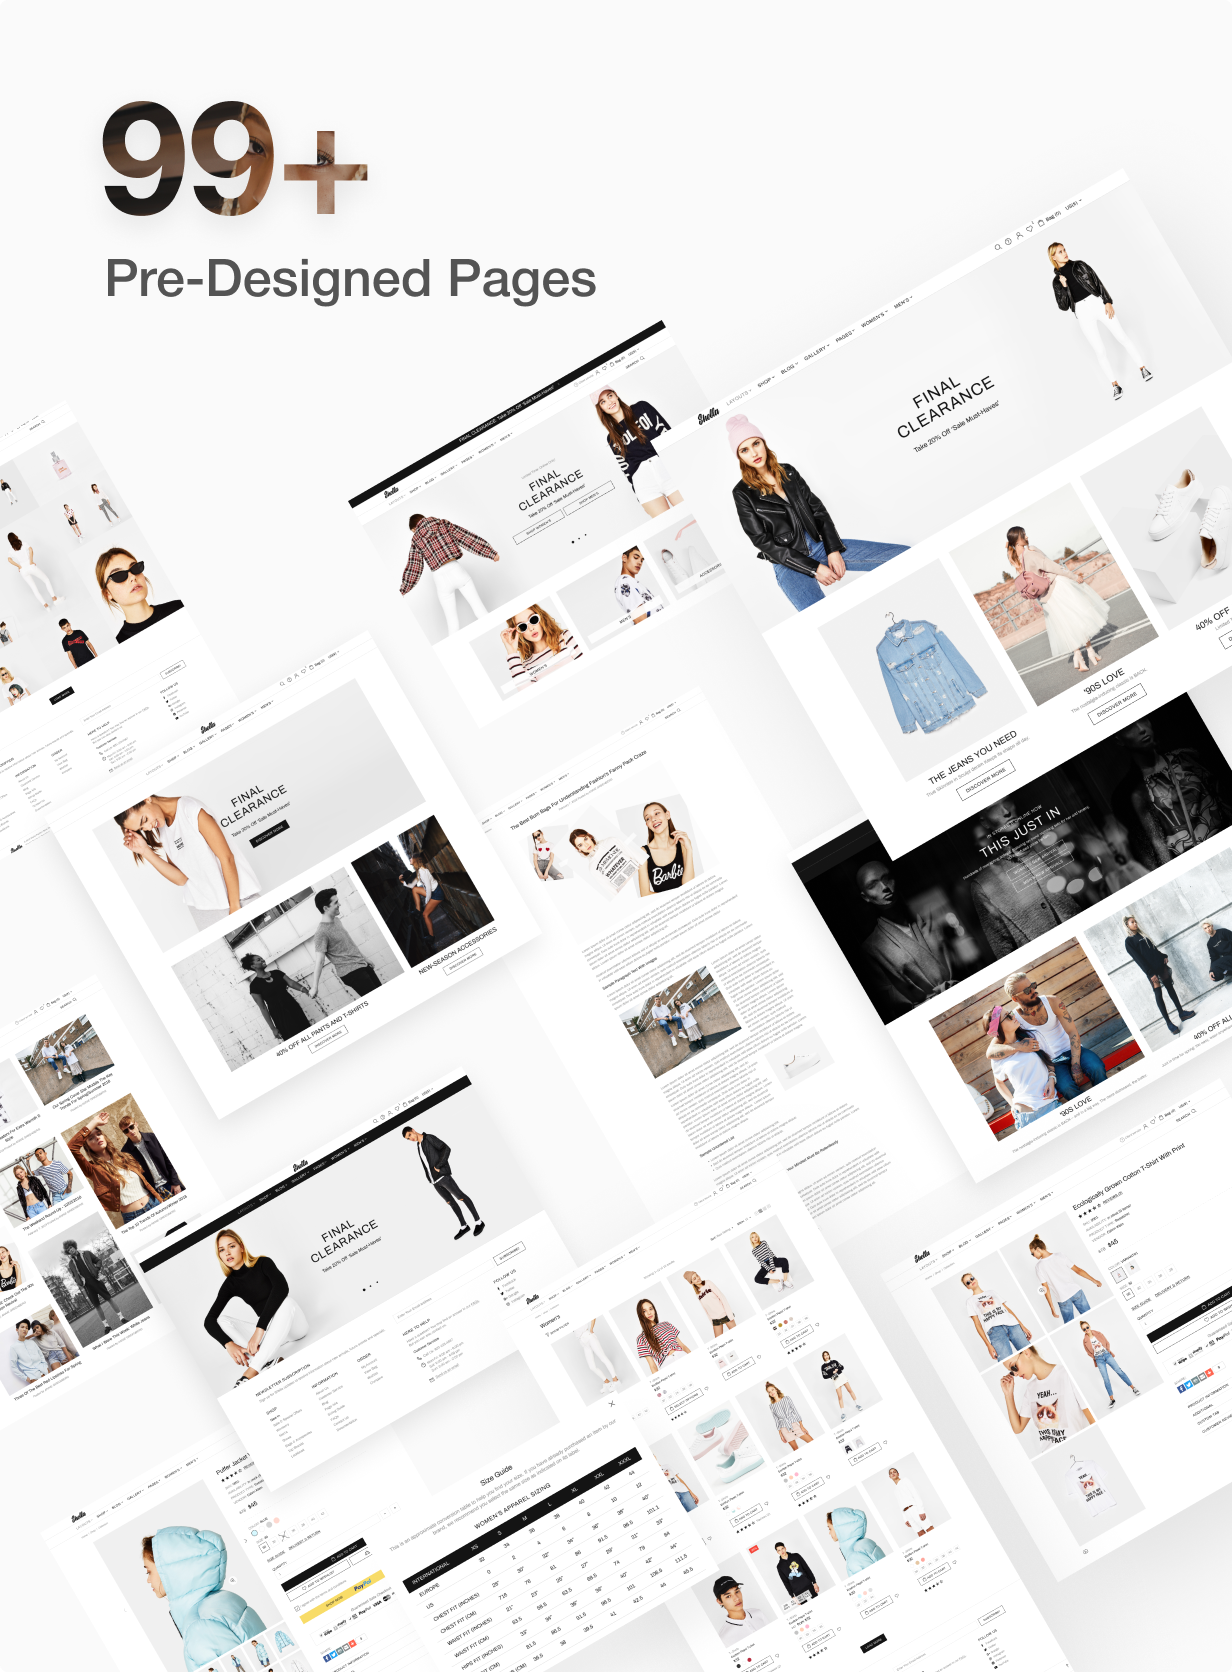 99+ pre designed pages for Shella Shopify theme